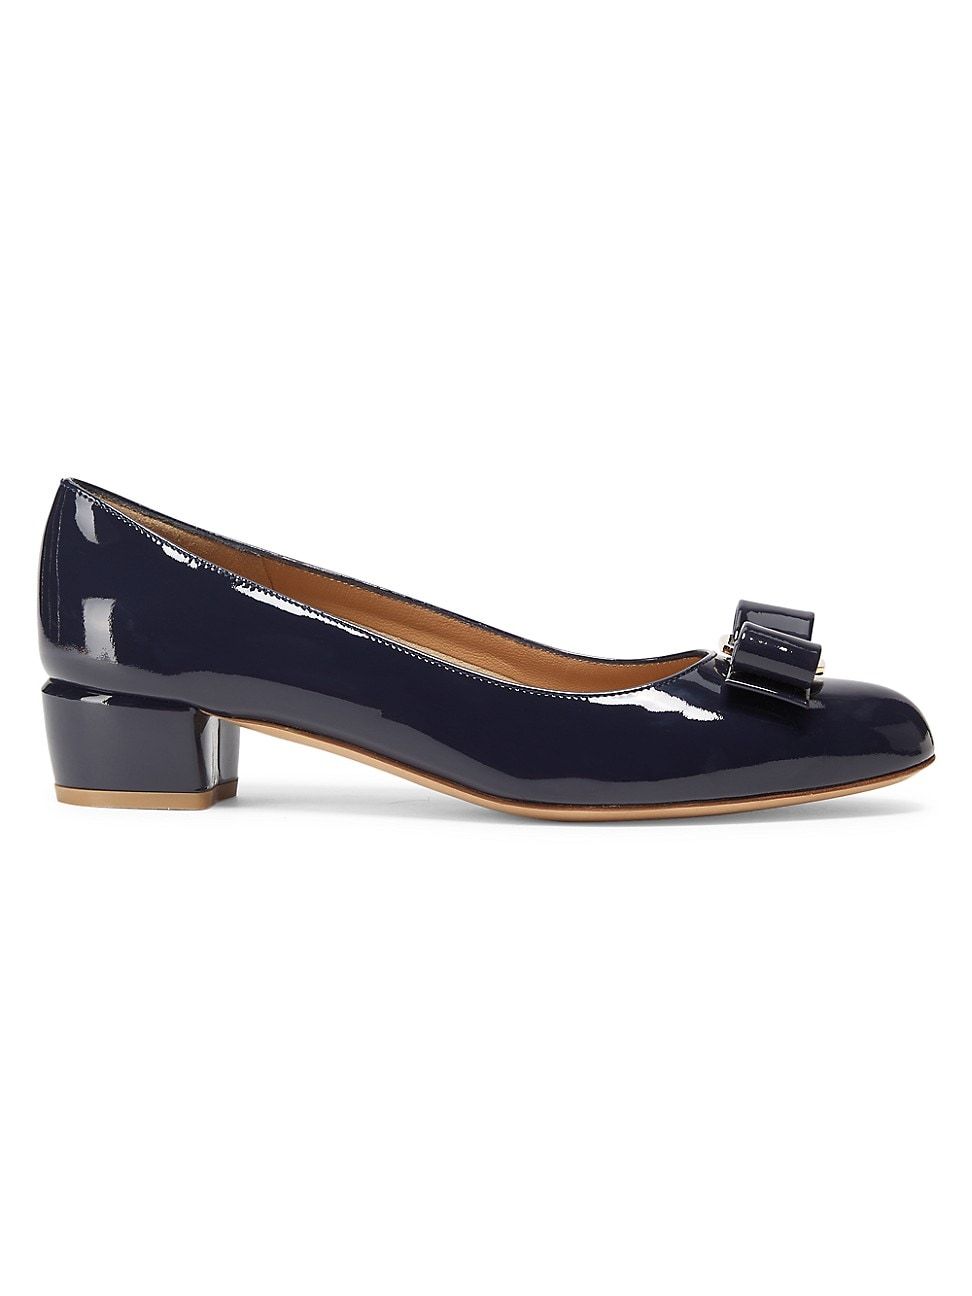 Women's Vara Patent Leather Pumps - Oxford Blue - Size 5 | Saks Fifth Avenue